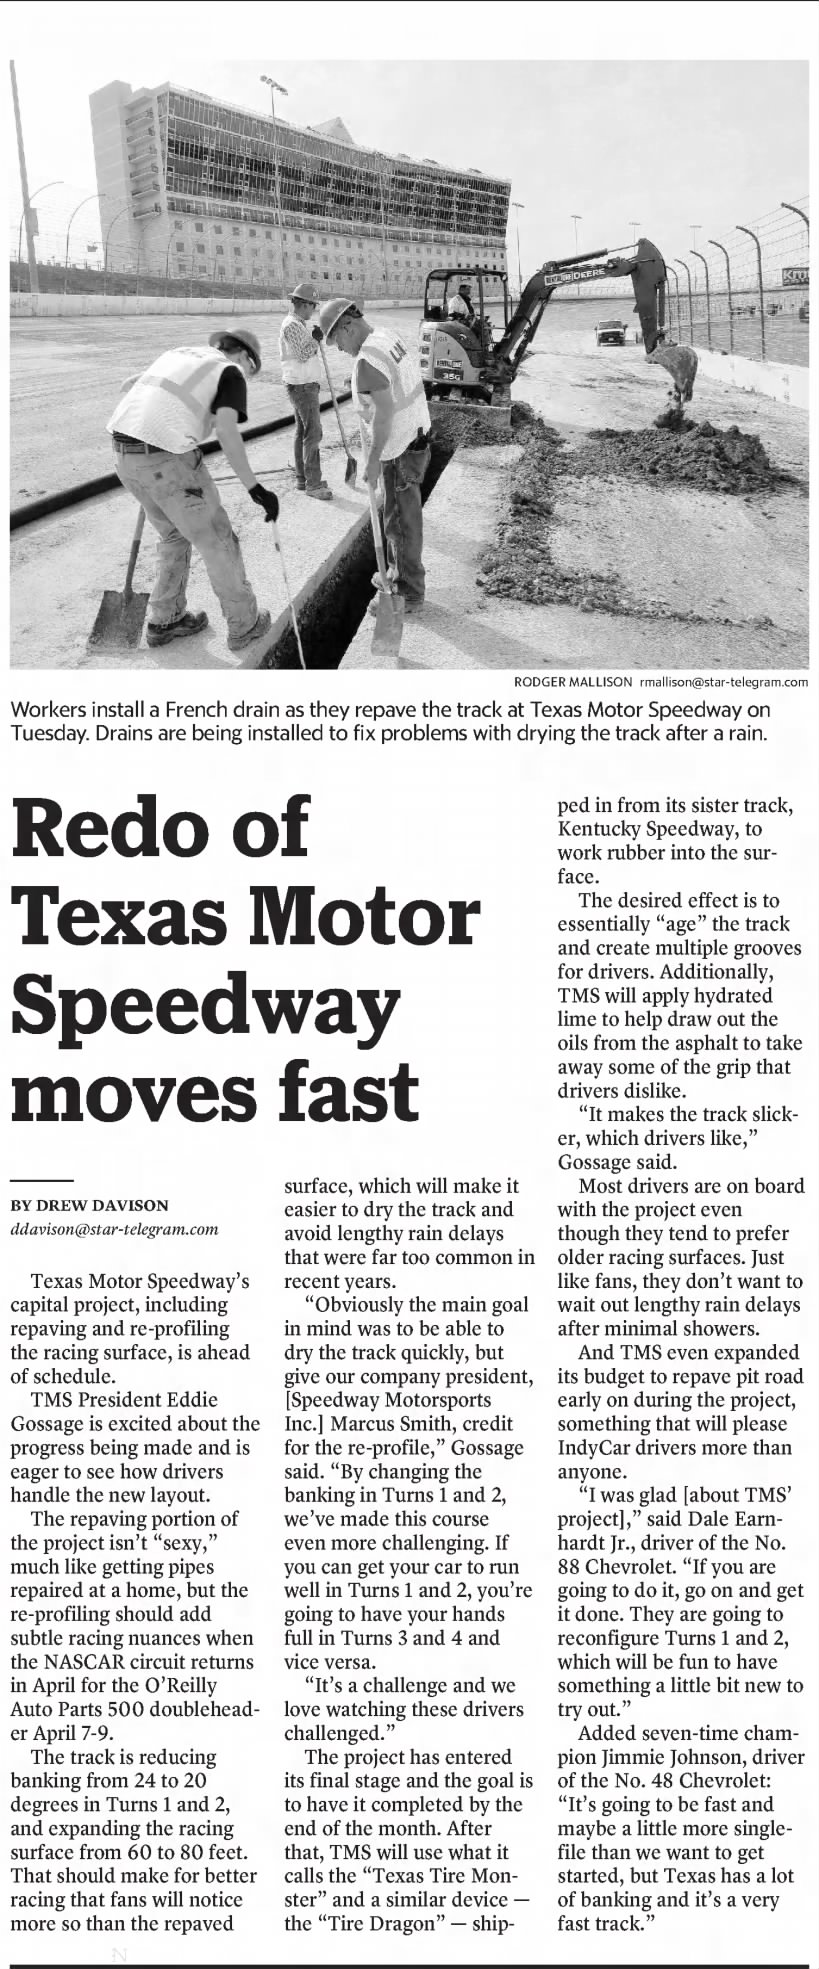 Redo of Texas Motor Speedway moves fast